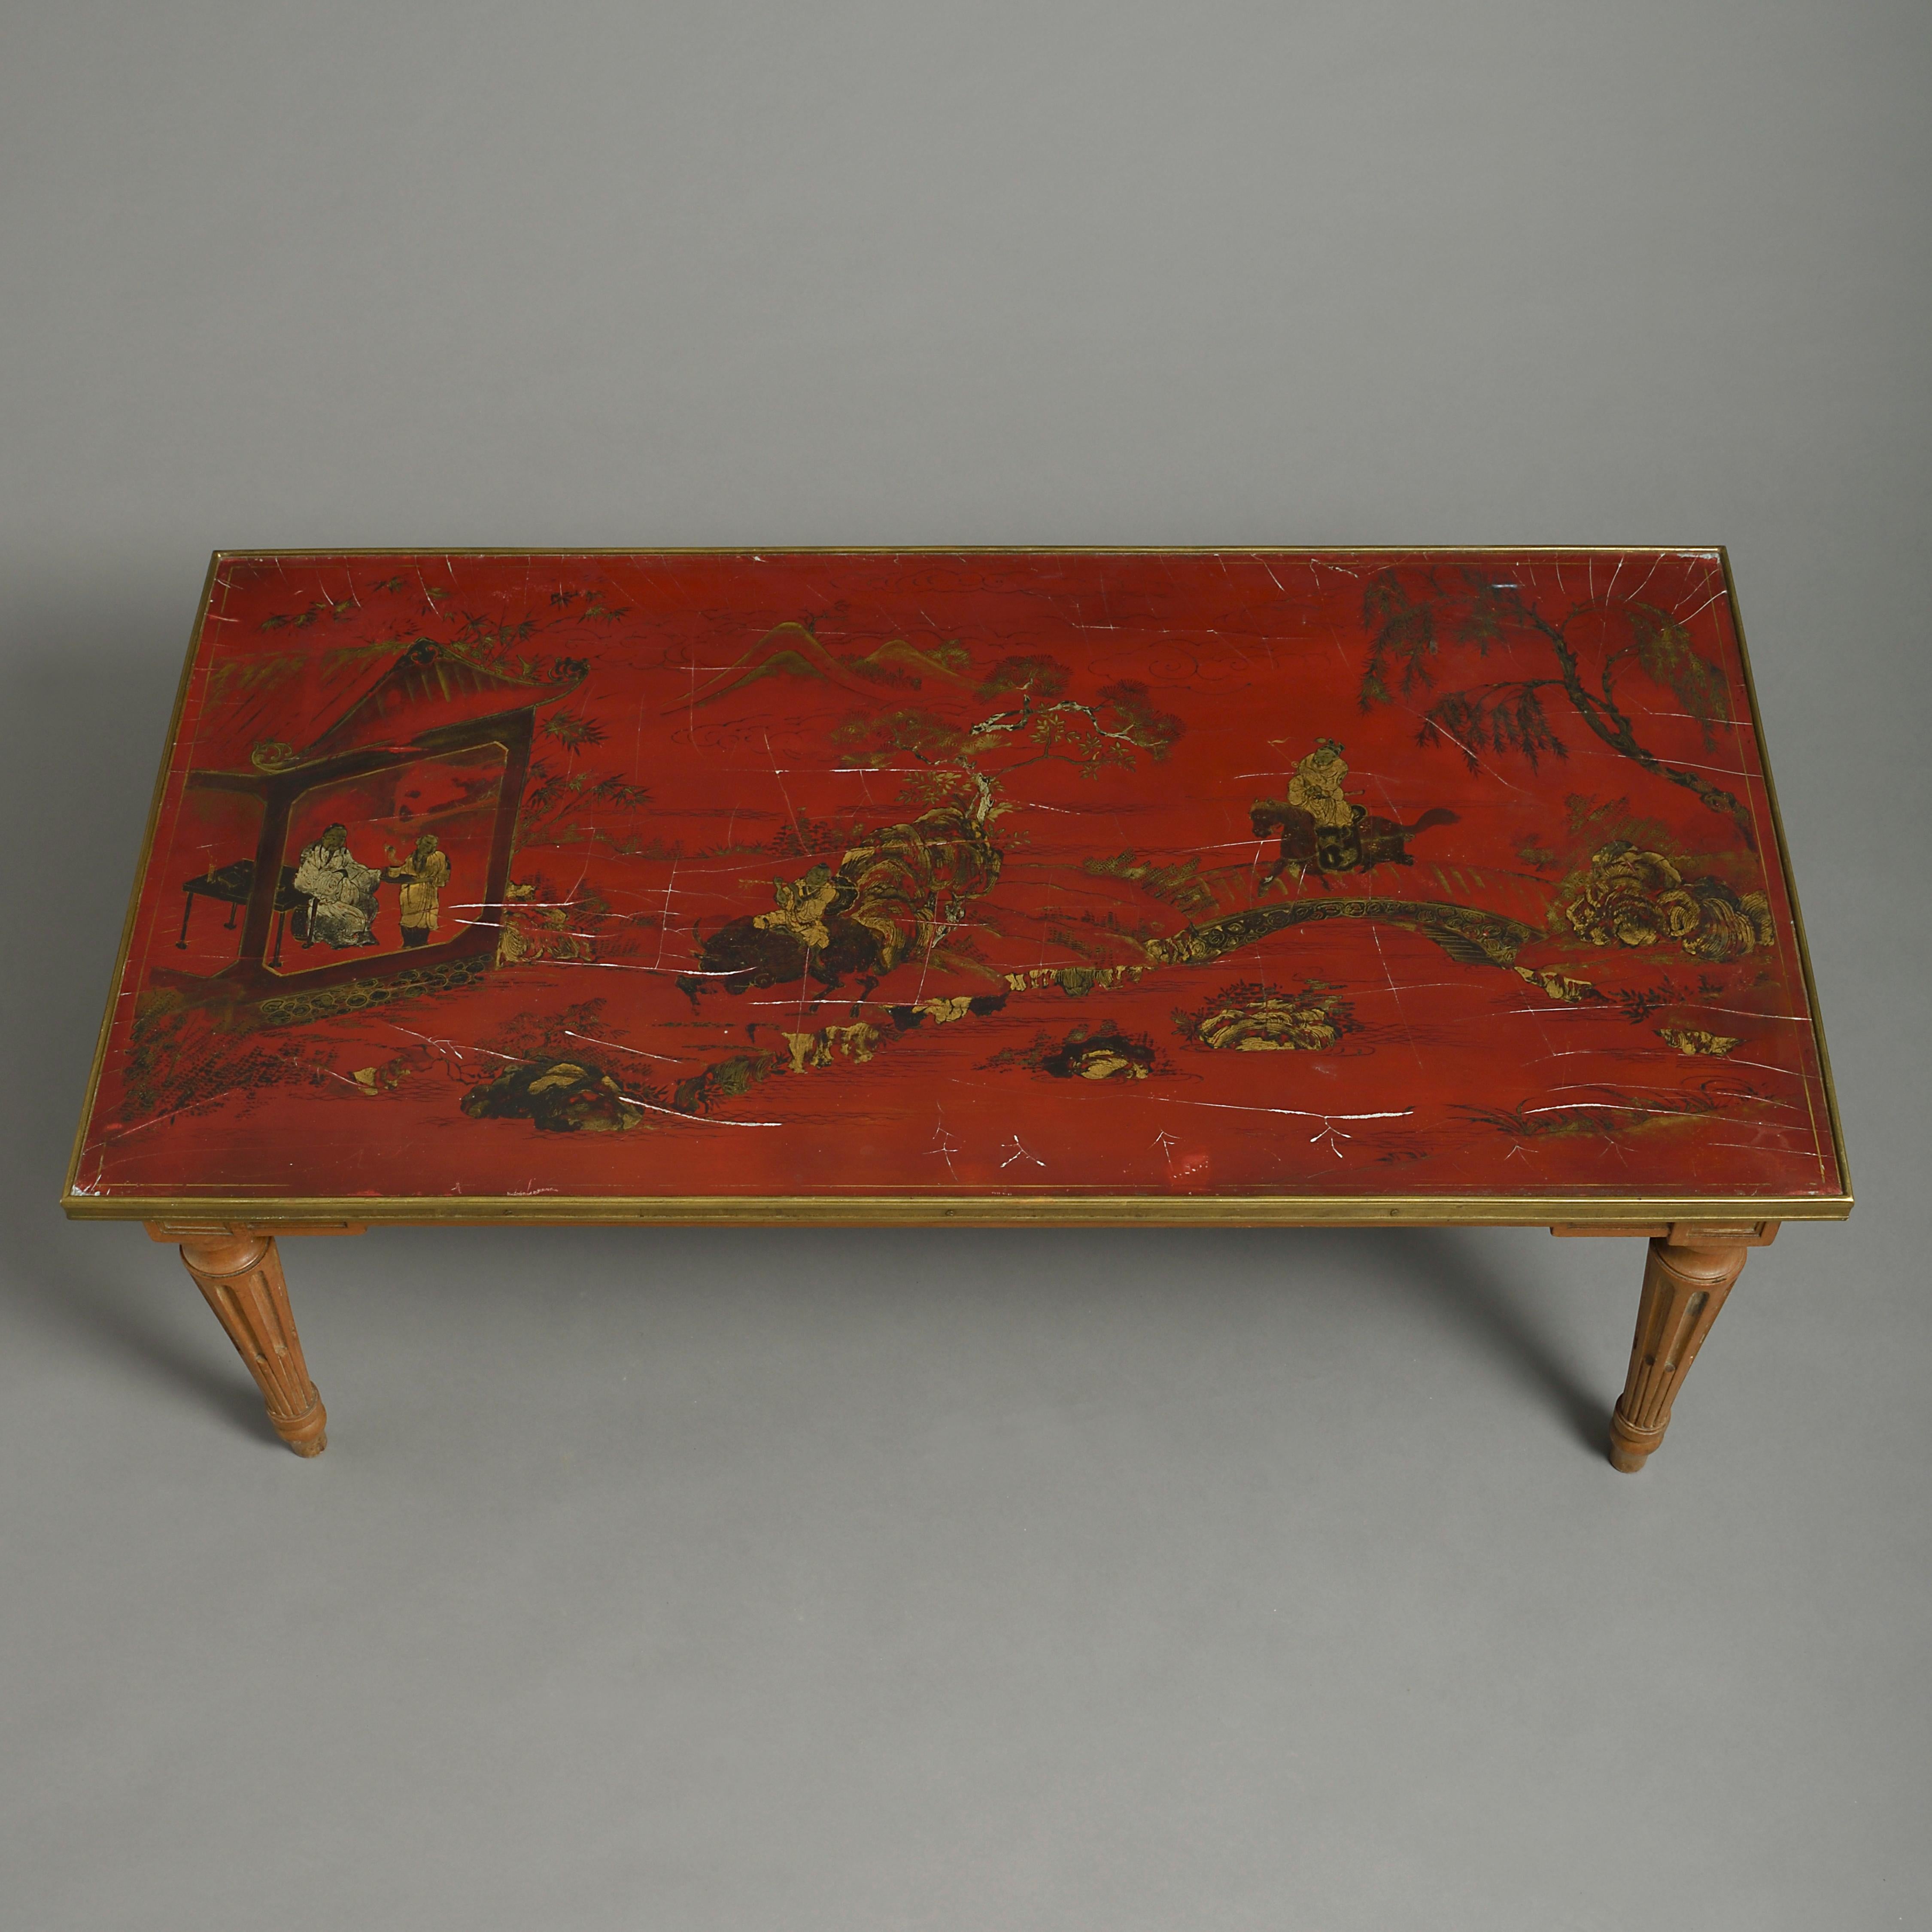 A fine late 19th century rectangular red lacquer panel, decorated with figurative scenes in gilt and polychrome, mounted on a mid-20th century beechwood base in the Louis XVI manner, as a low table.

The wooden table base was clearly made in the